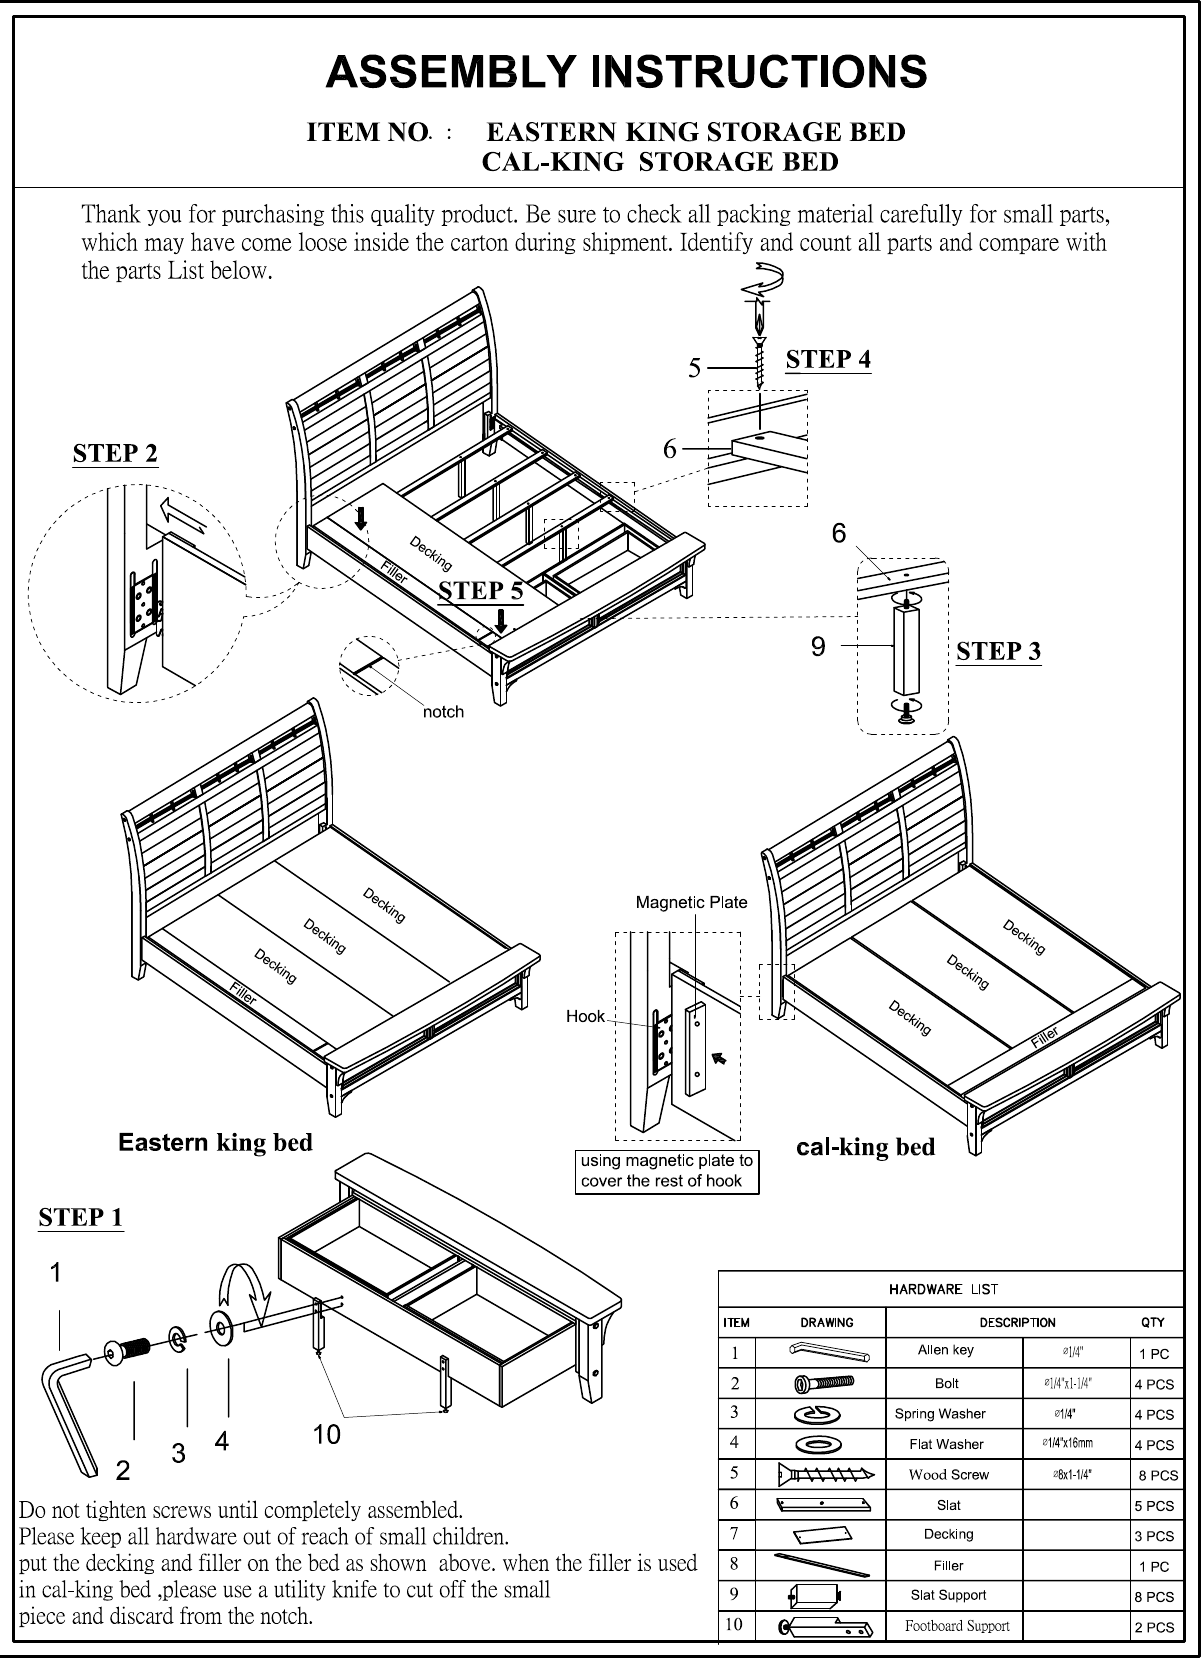 Page 1 of 1 - B401 Bedroom Assembly Instructions-2102-09-15  How To Assemble Hy King Sleigh Storage Bed